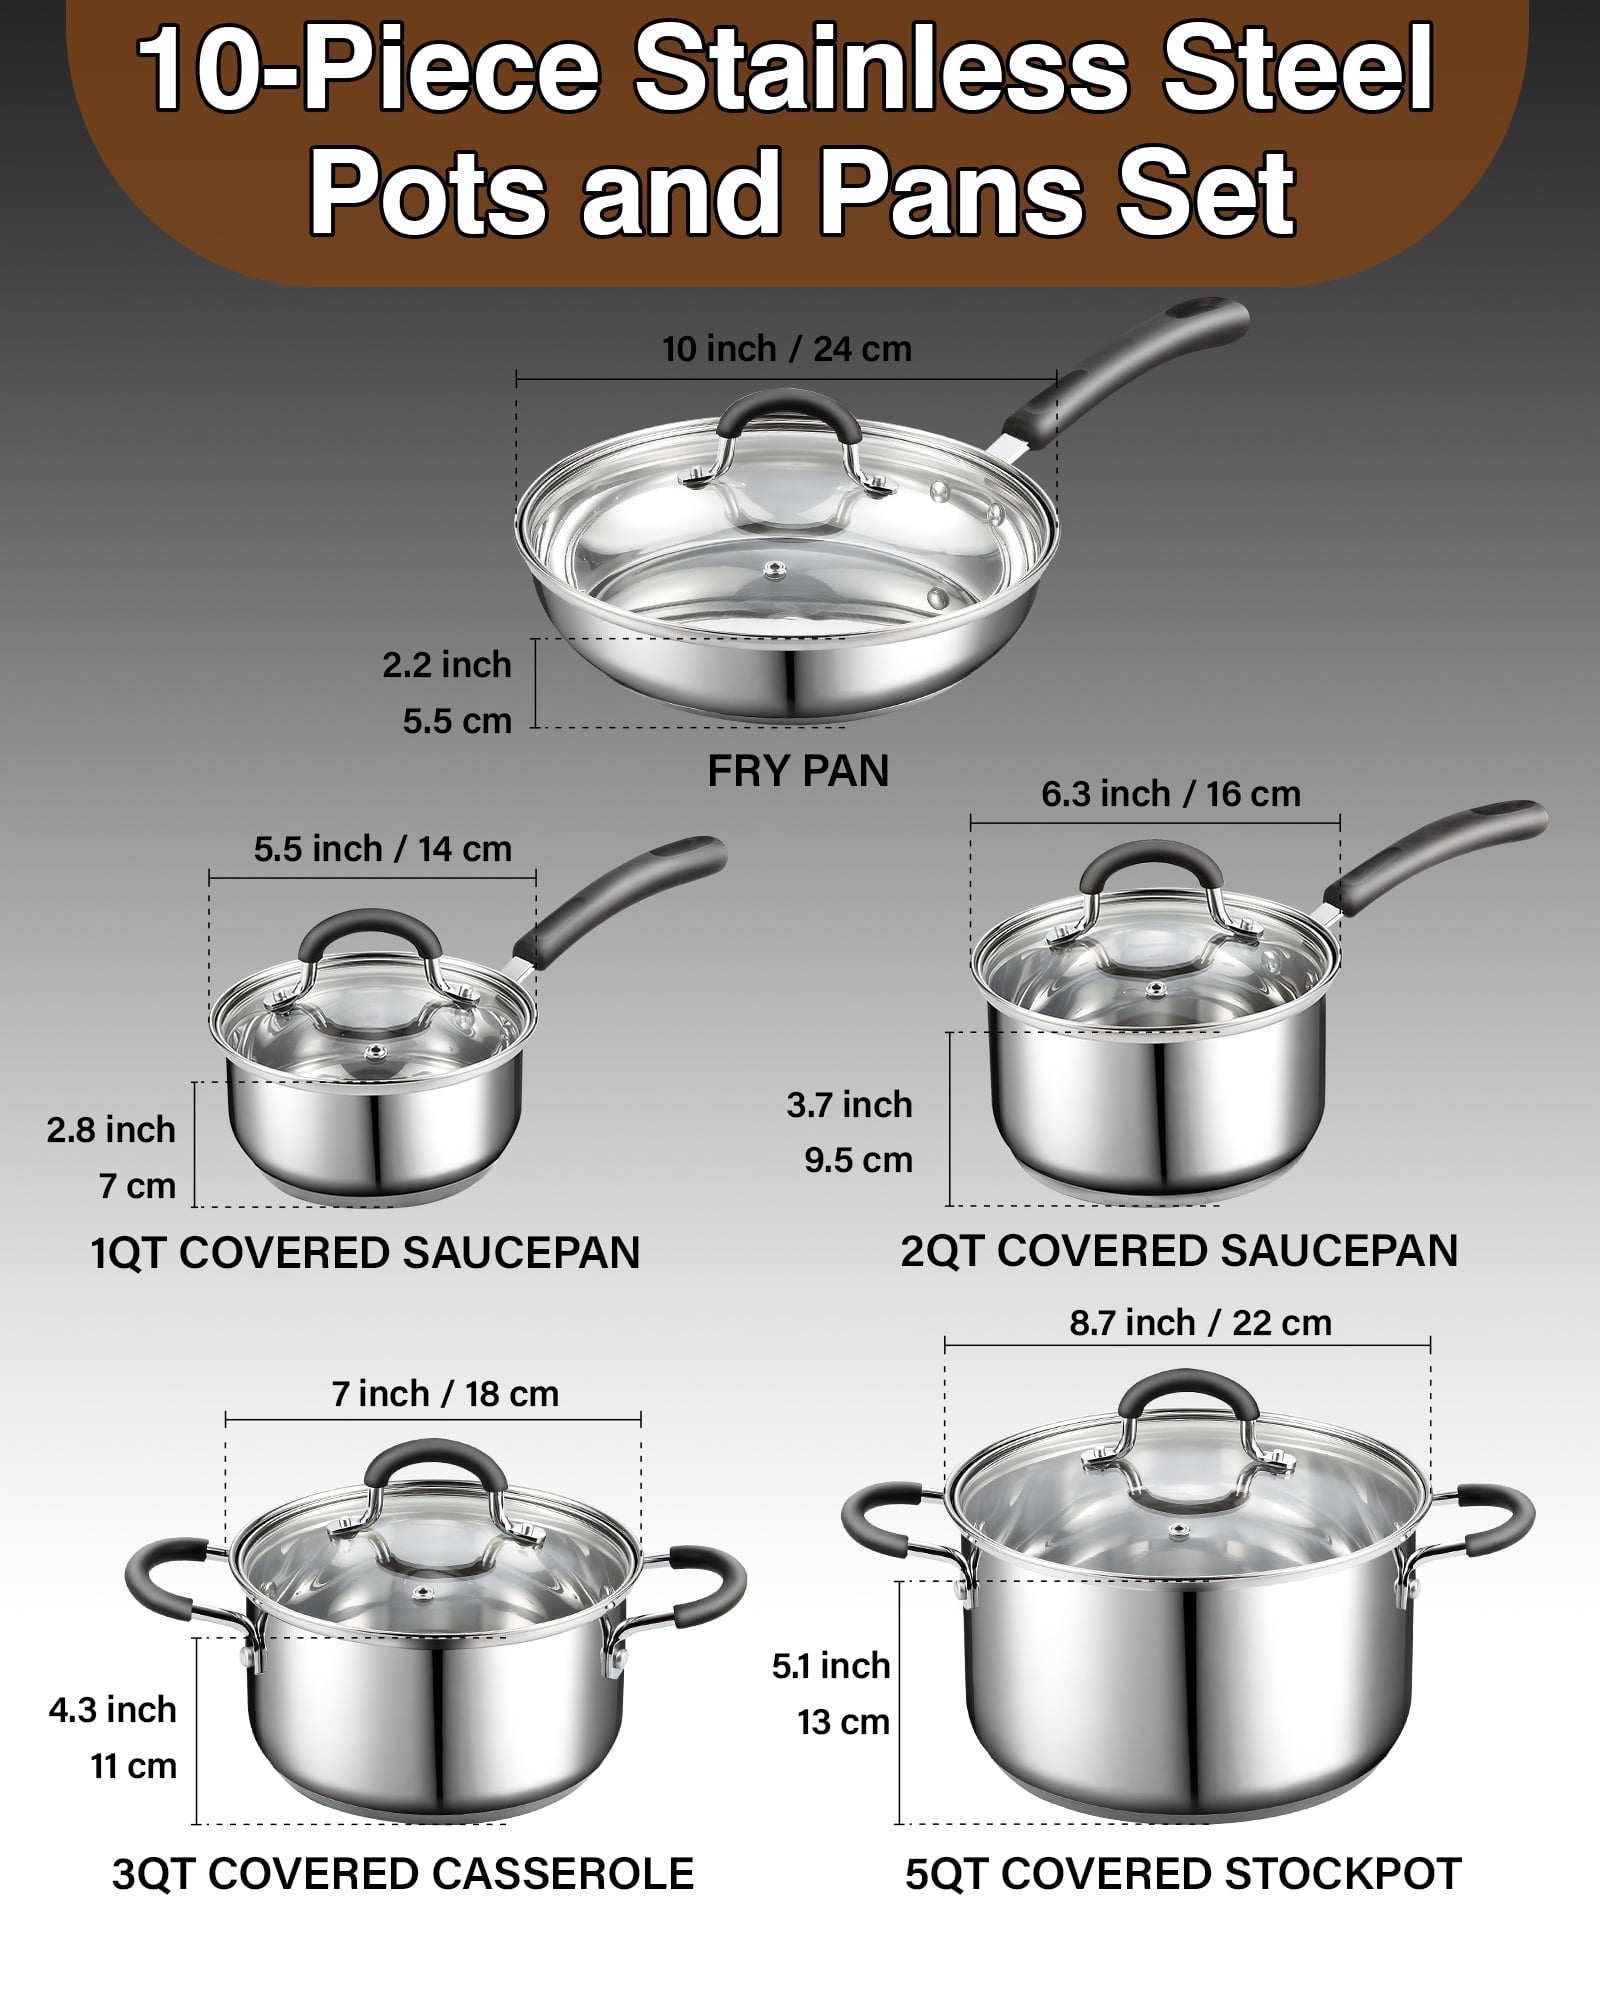 Cook N Home Pots and Pans Nonstick Kitchen Cookware Set with Stay Cool  Handle, set - Fry's Food Stores